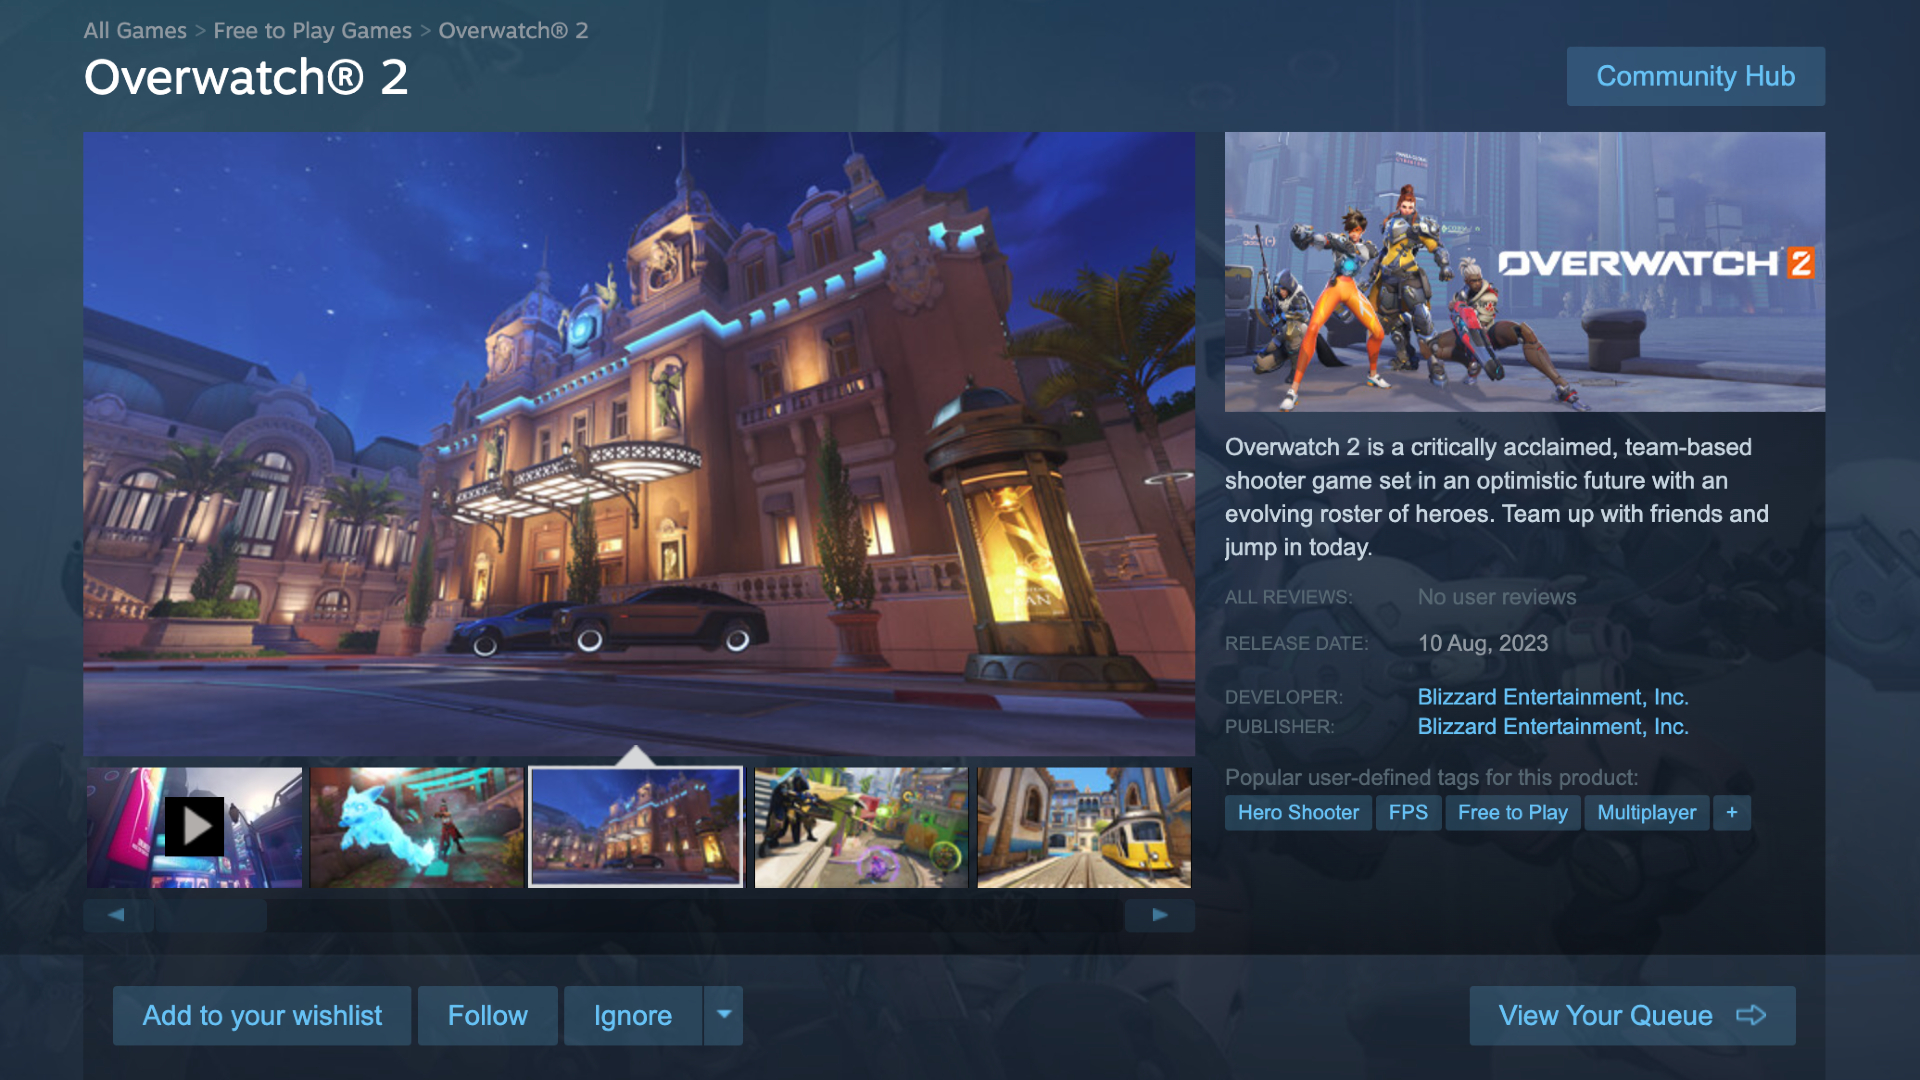 A screenshot of Overwatch 2's Steam page showing the game available for preload